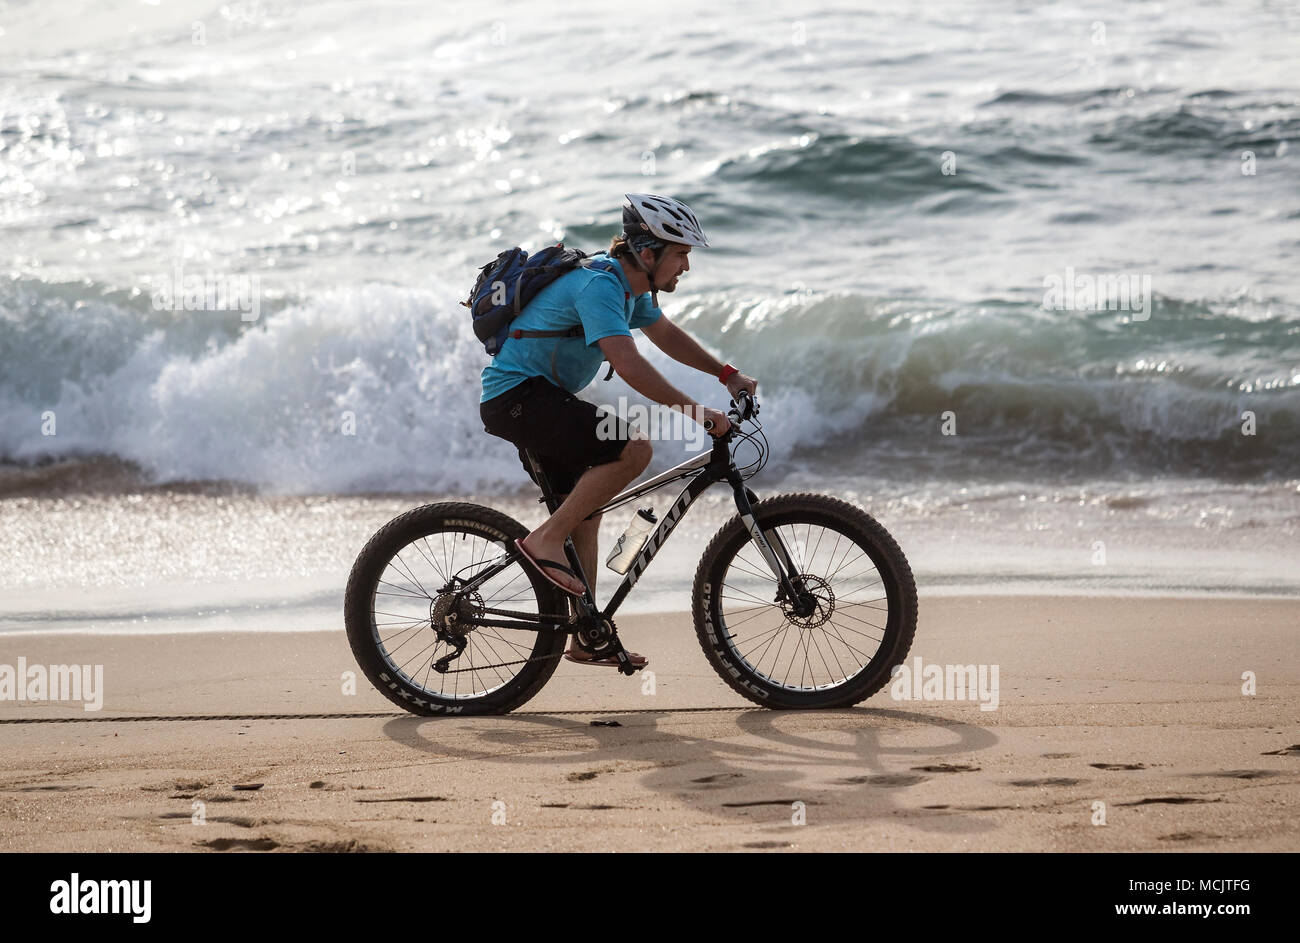 Durban, South Africa, April 9 - 2018: Man riding bicycle along the beach. Stock Photo